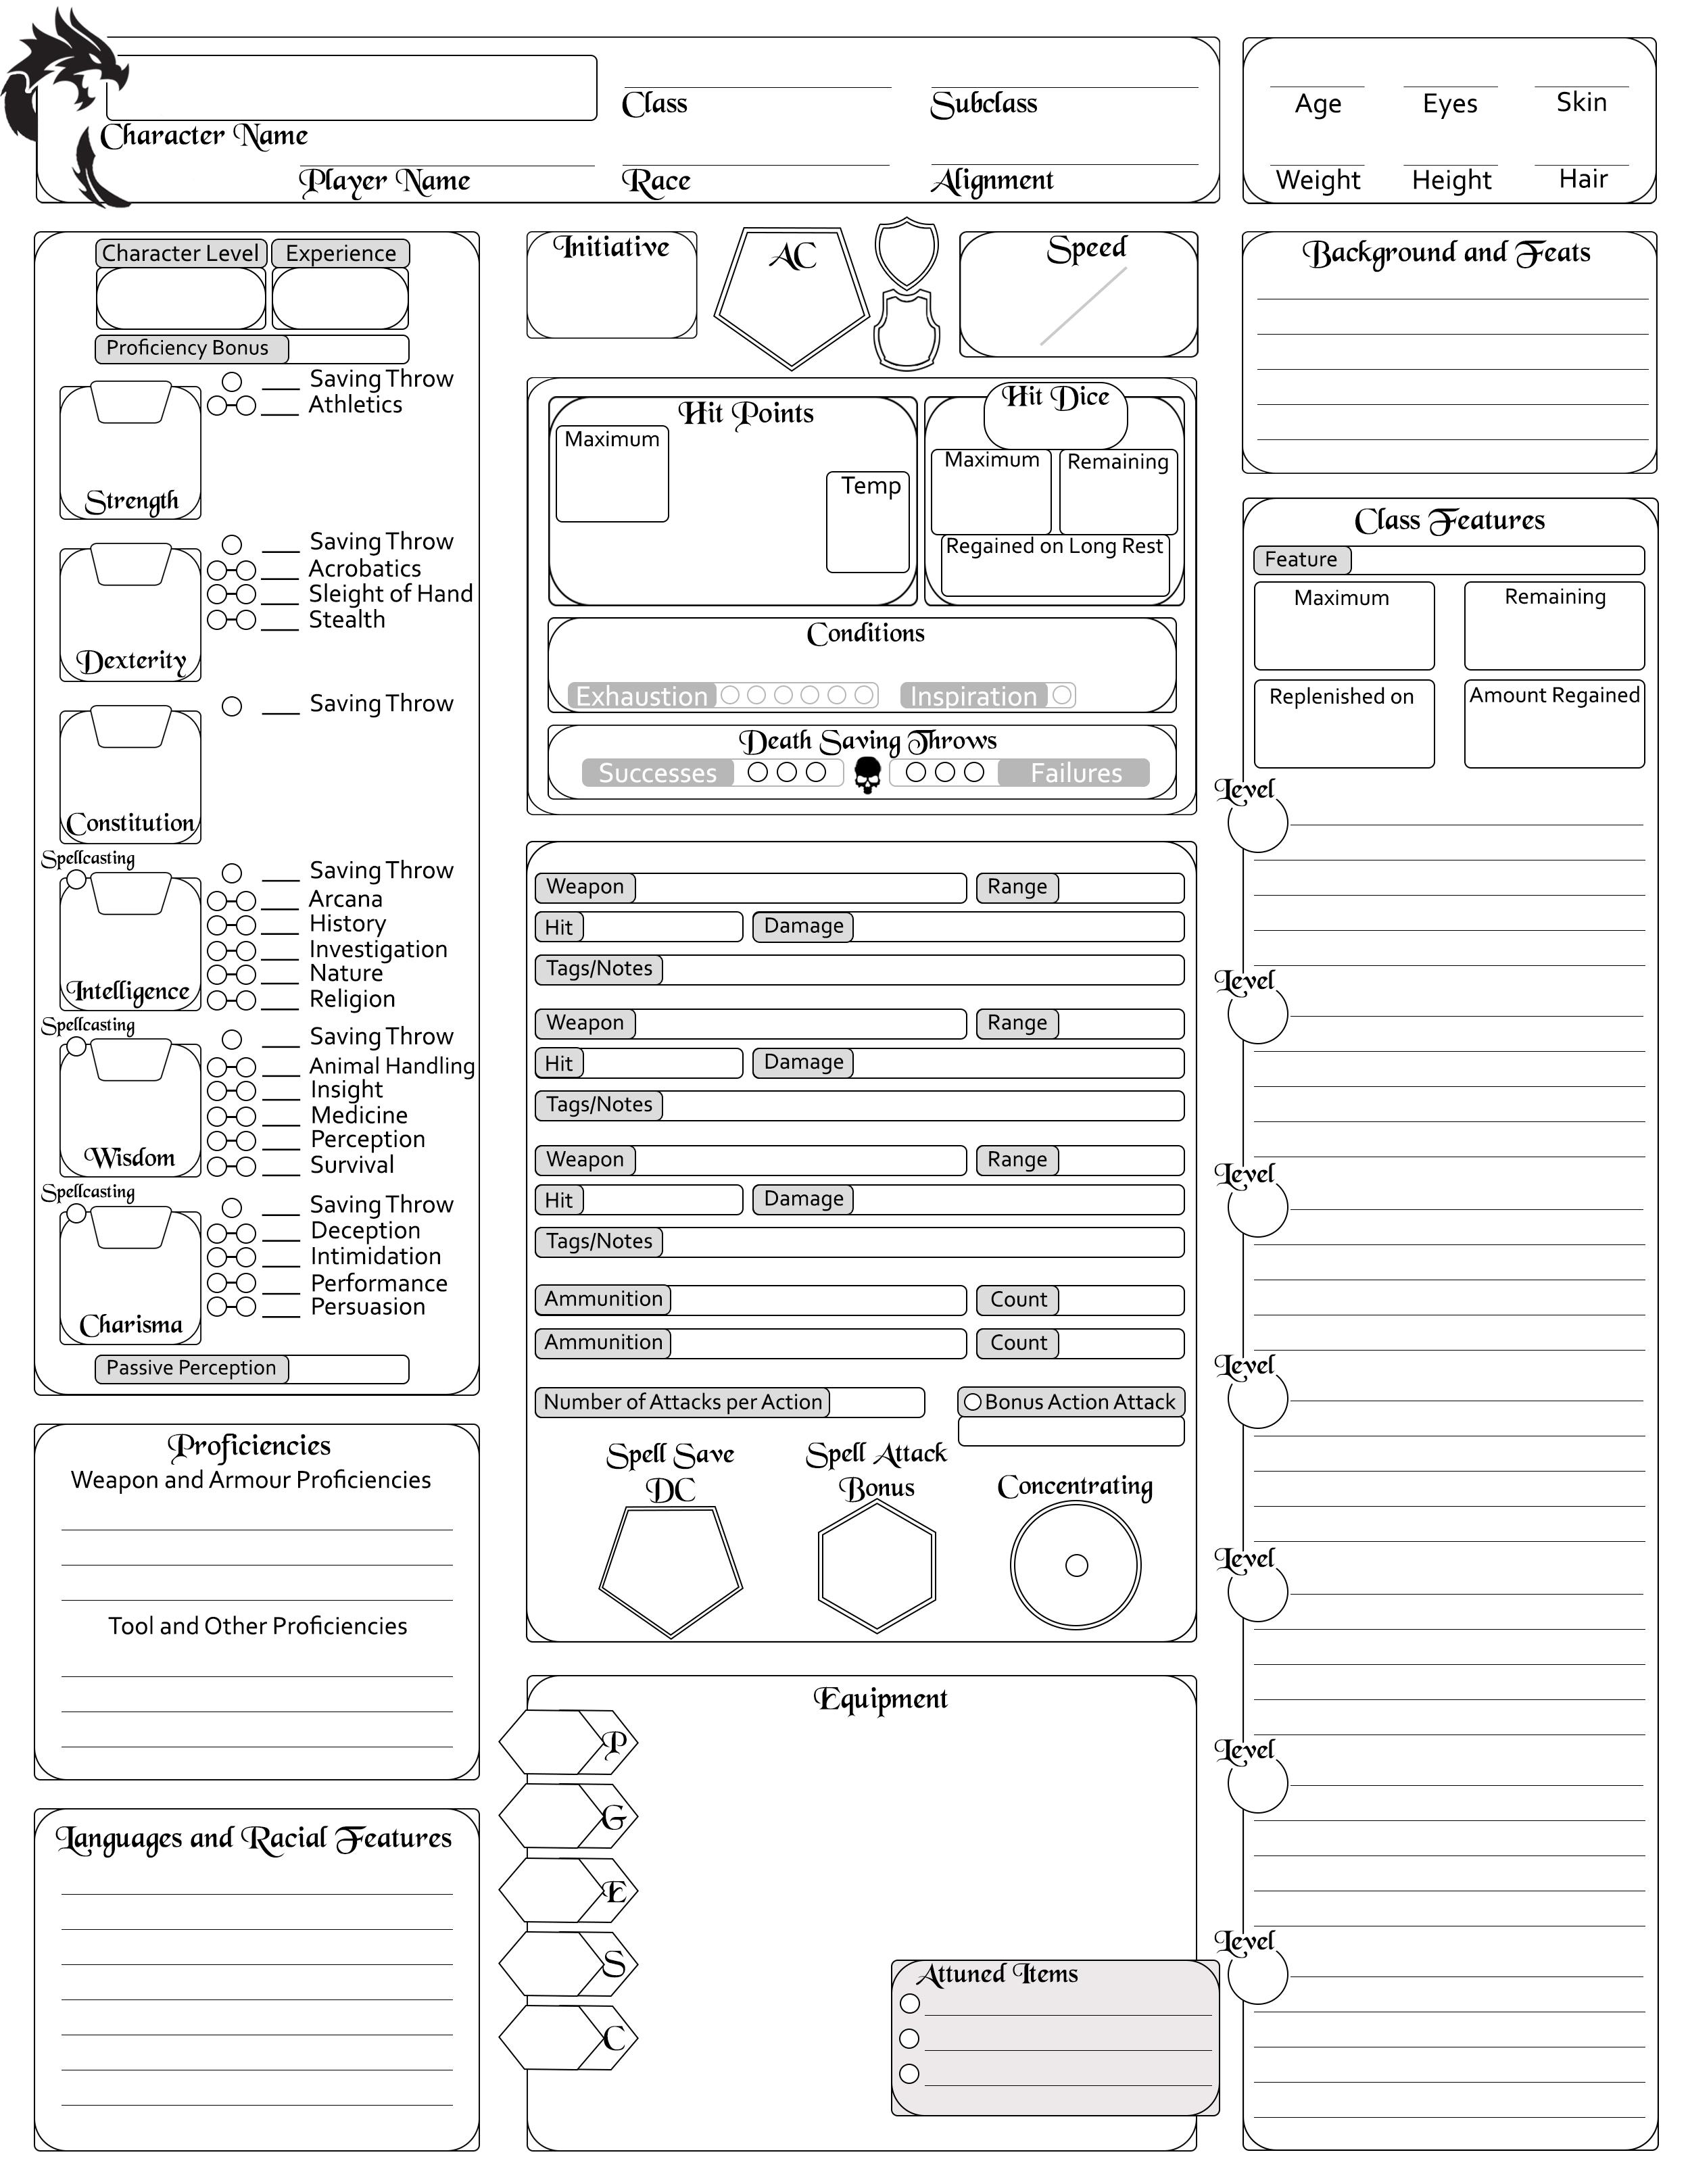 dnd-5e-character-sheet-pdf-thereallegs